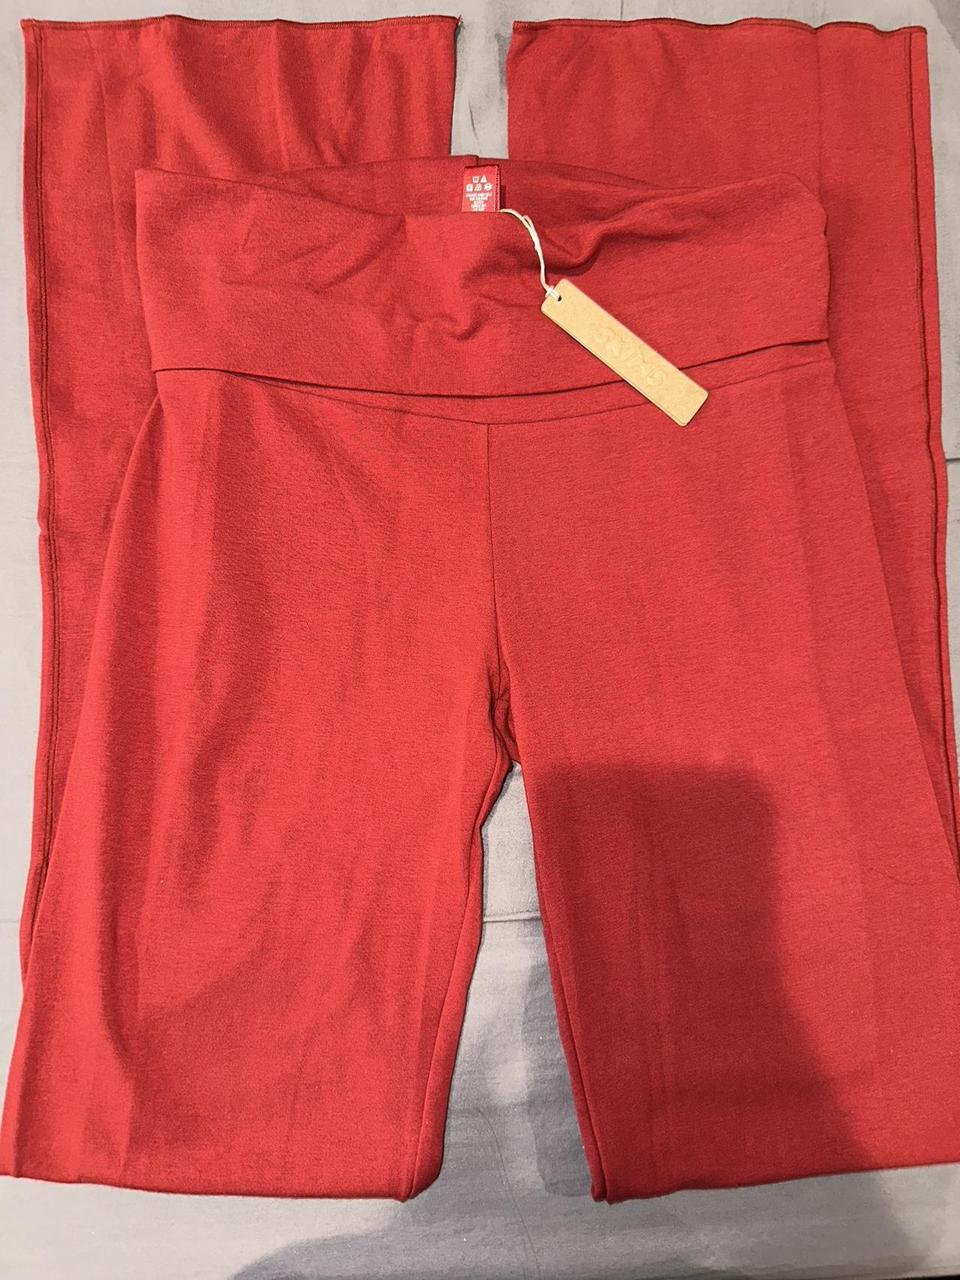 SKIMS cotton jersey foldover pant Red Size XS - $100 New With Tags - From  julia